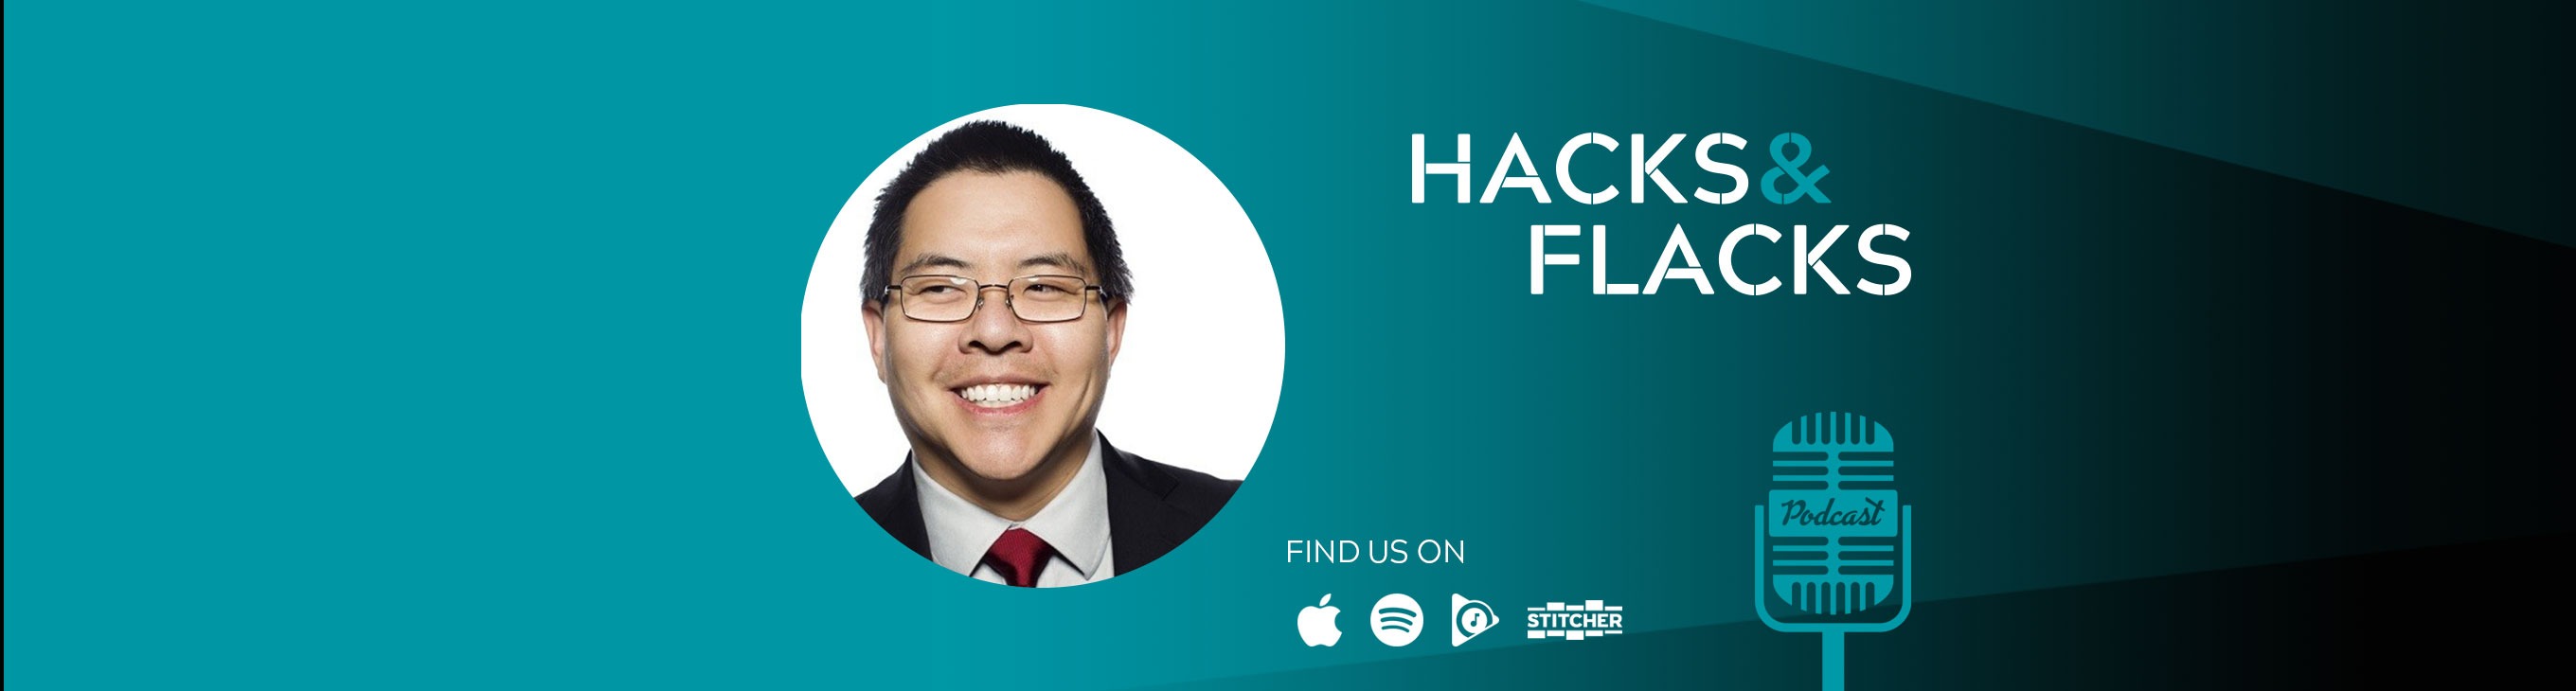 Chris Penn of Trust Insights joins the Hacks and Flacks podcast to discuss data science for marketing and public relations